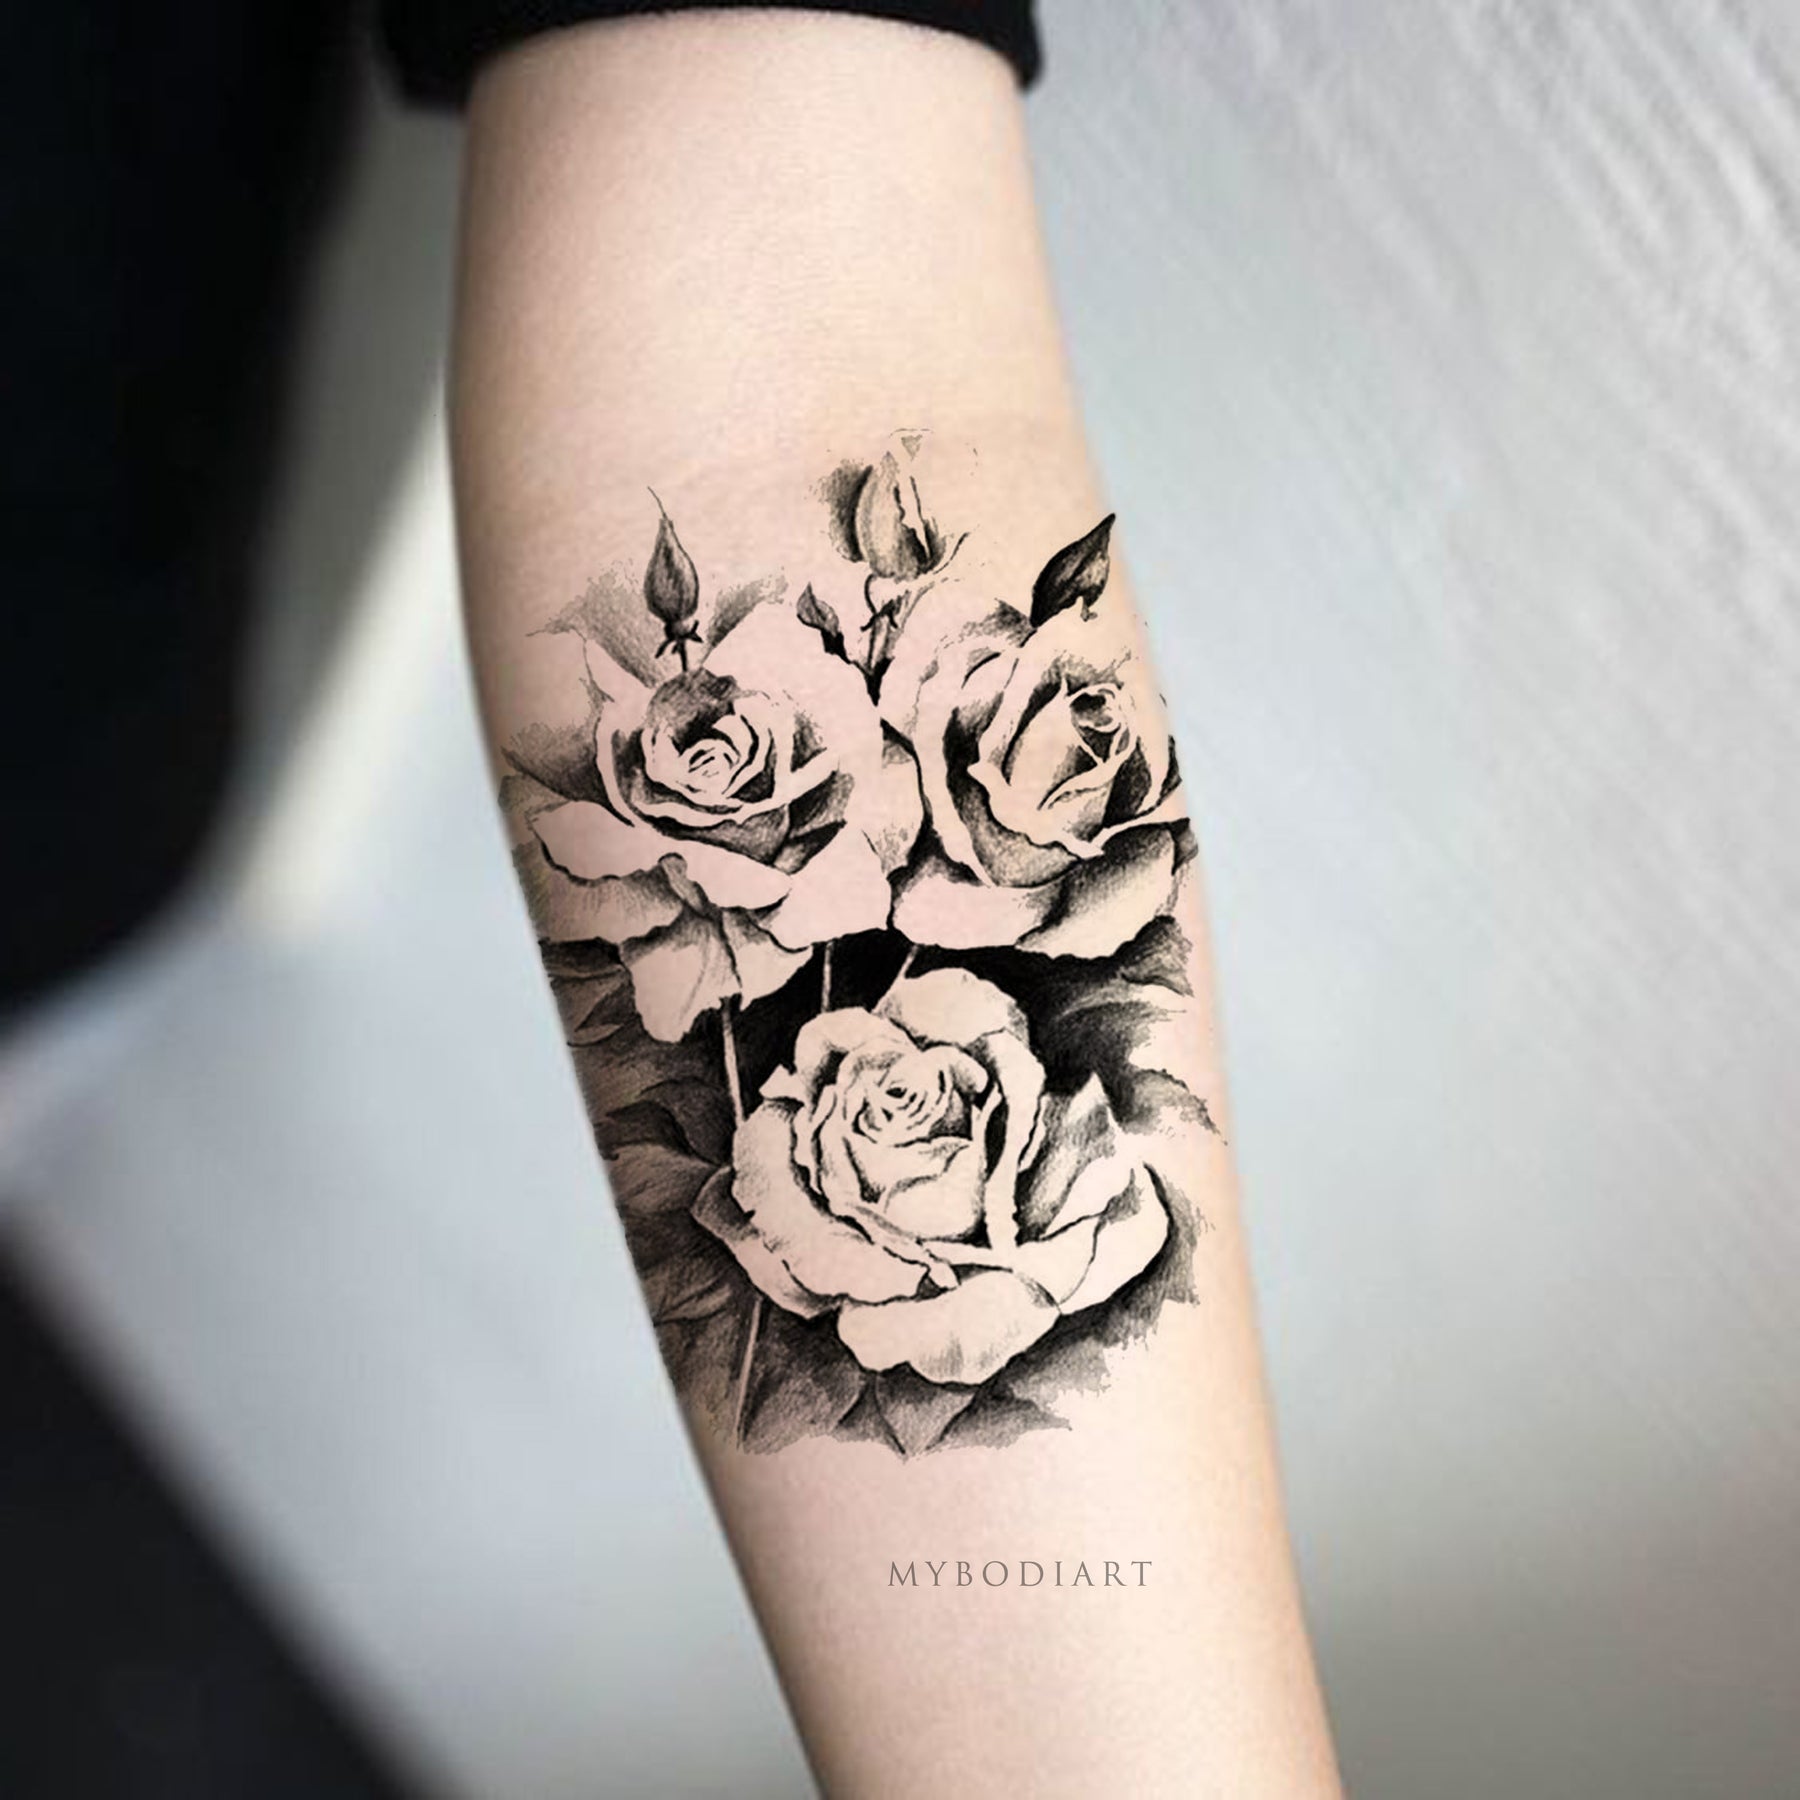 Black Floral Temporary Tattoo Flower Tattoo Temporary Tattoo Sleeve Arm Tattoo Festival Jewelry Festival Accessories Fake Tattoos Floral Vintage Traditional Black Mybodiart